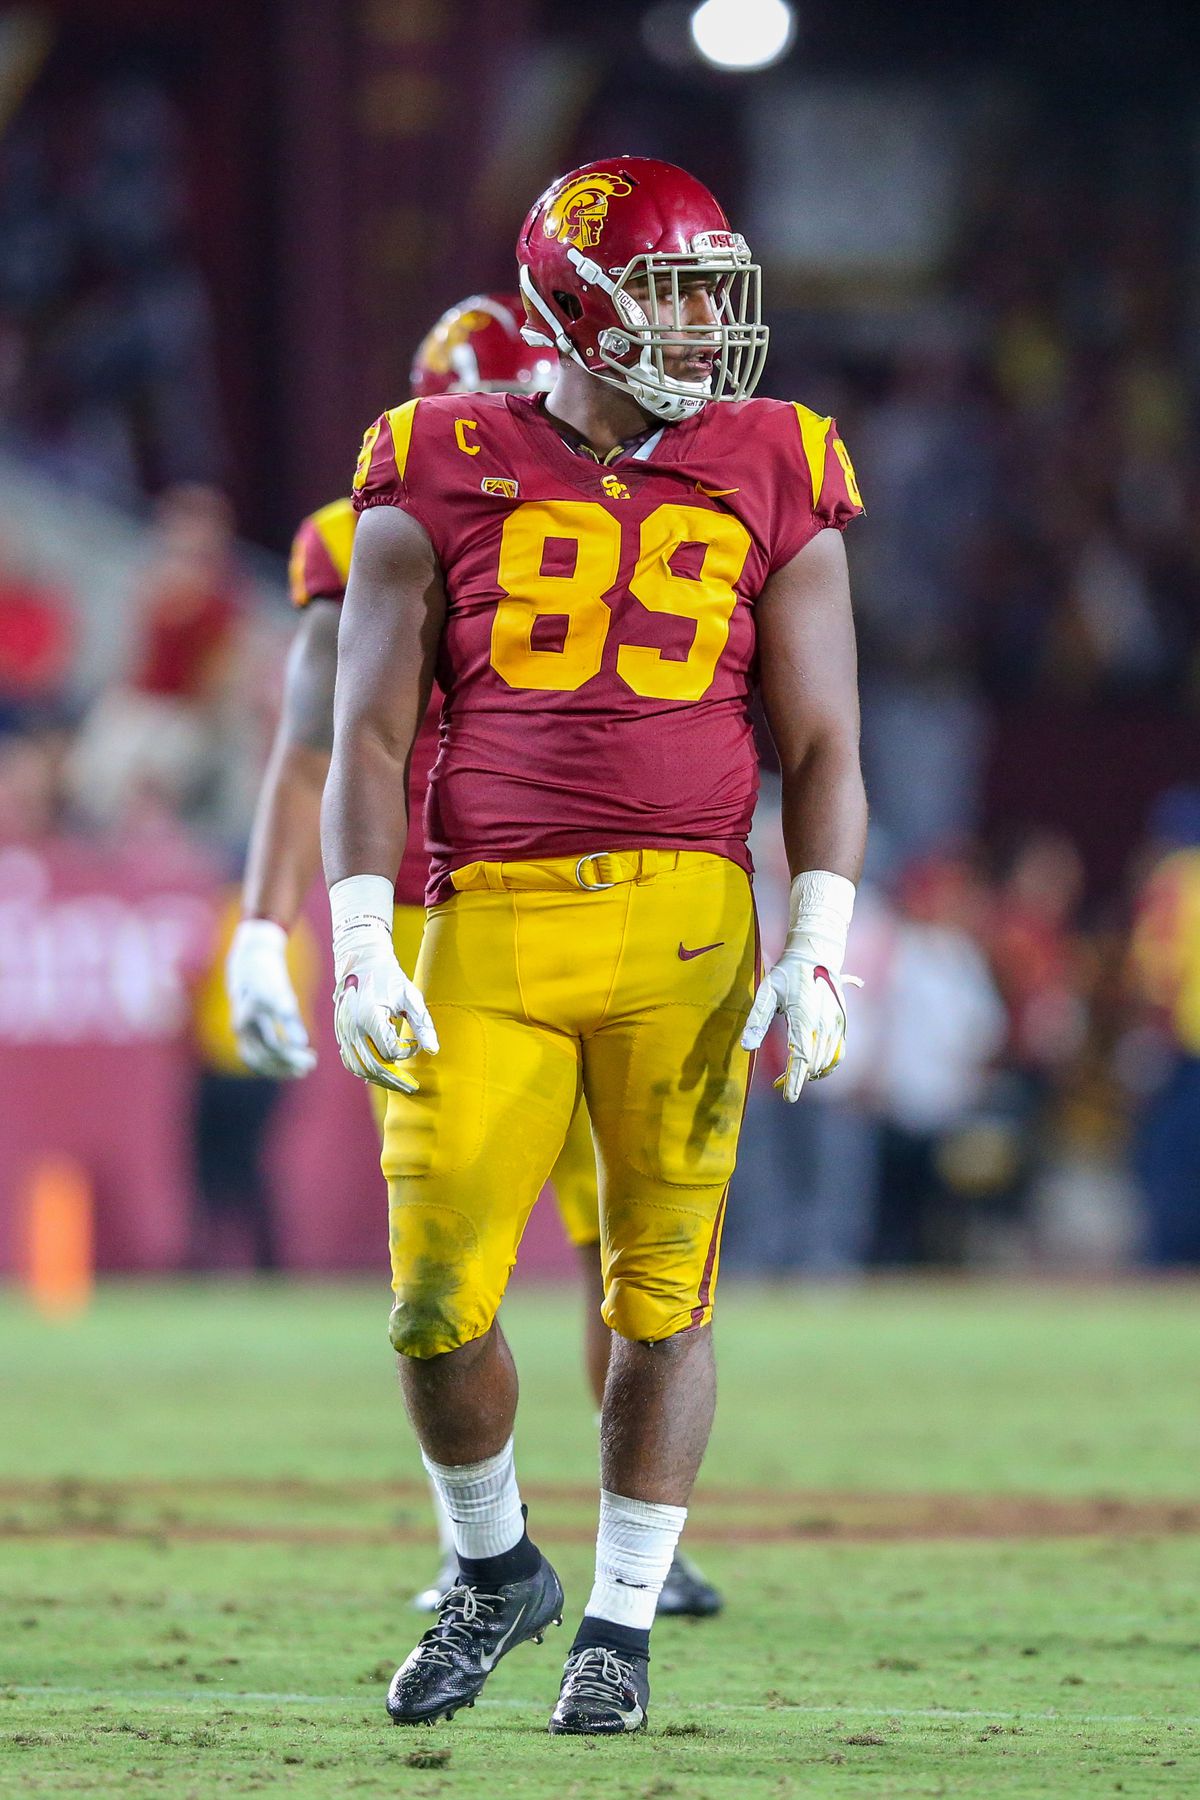 COLLEGE FOOTBALL: AUG 31 Fresno State at USC